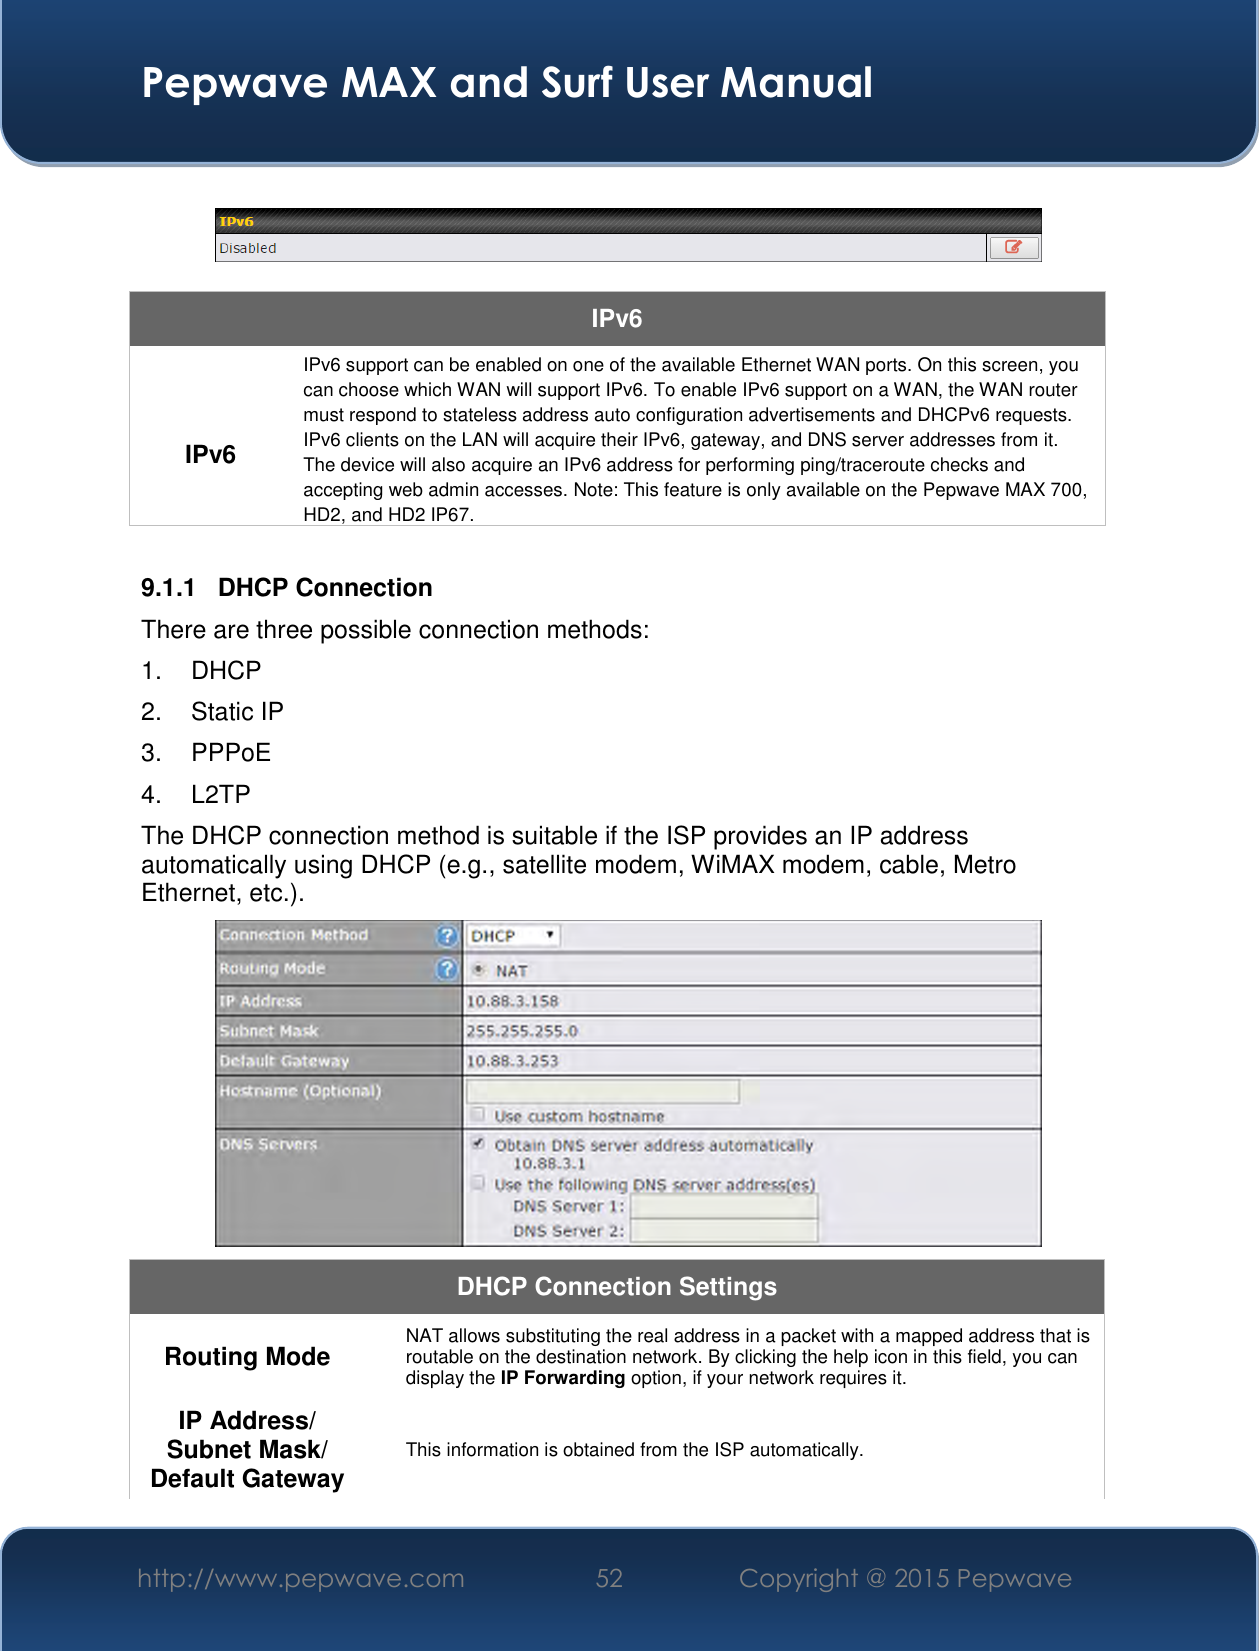  Pepwave MAX and Surf User Manual http://www.pepwave.com 52   Copyright @ 2015 Pepwave      IPv6  IPv6 IPv6 support can be enabled on one of the available Ethernet WAN ports. On this screen, you can choose which WAN will support IPv6. To enable IPv6 support on a WAN, the WAN router must respond to stateless address auto configuration advertisements and DHCPv6 requests. IPv6 clients on the LAN will acquire their IPv6, gateway, and DNS server addresses from it. The device will also acquire an IPv6 address for performing ping/traceroute checks and accepting web admin accesses. Note: This feature is only available on the Pepwave MAX 700, HD2, and HD2 IP67.  9.1.1  DHCP Connection There are three possible connection methods:  1. DHCP 2.  Static IP 3.  PPPoE 4.  L2TP The DHCP connection method is suitable if the ISP provides an IP address automatically using DHCP (e.g., satellite modem, WiMAX modem, cable, Metro Ethernet, etc.).  DHCP Connection Settings  Routing Mode  NAT allows substituting the real address in a packet with a mapped address that is routable on the destination network. By clicking the help icon in this field, you can display the IP Forwarding option, if your network requires it. IP Address/ Subnet Mask/ Default Gateway This information is obtained from the ISP automatically. 